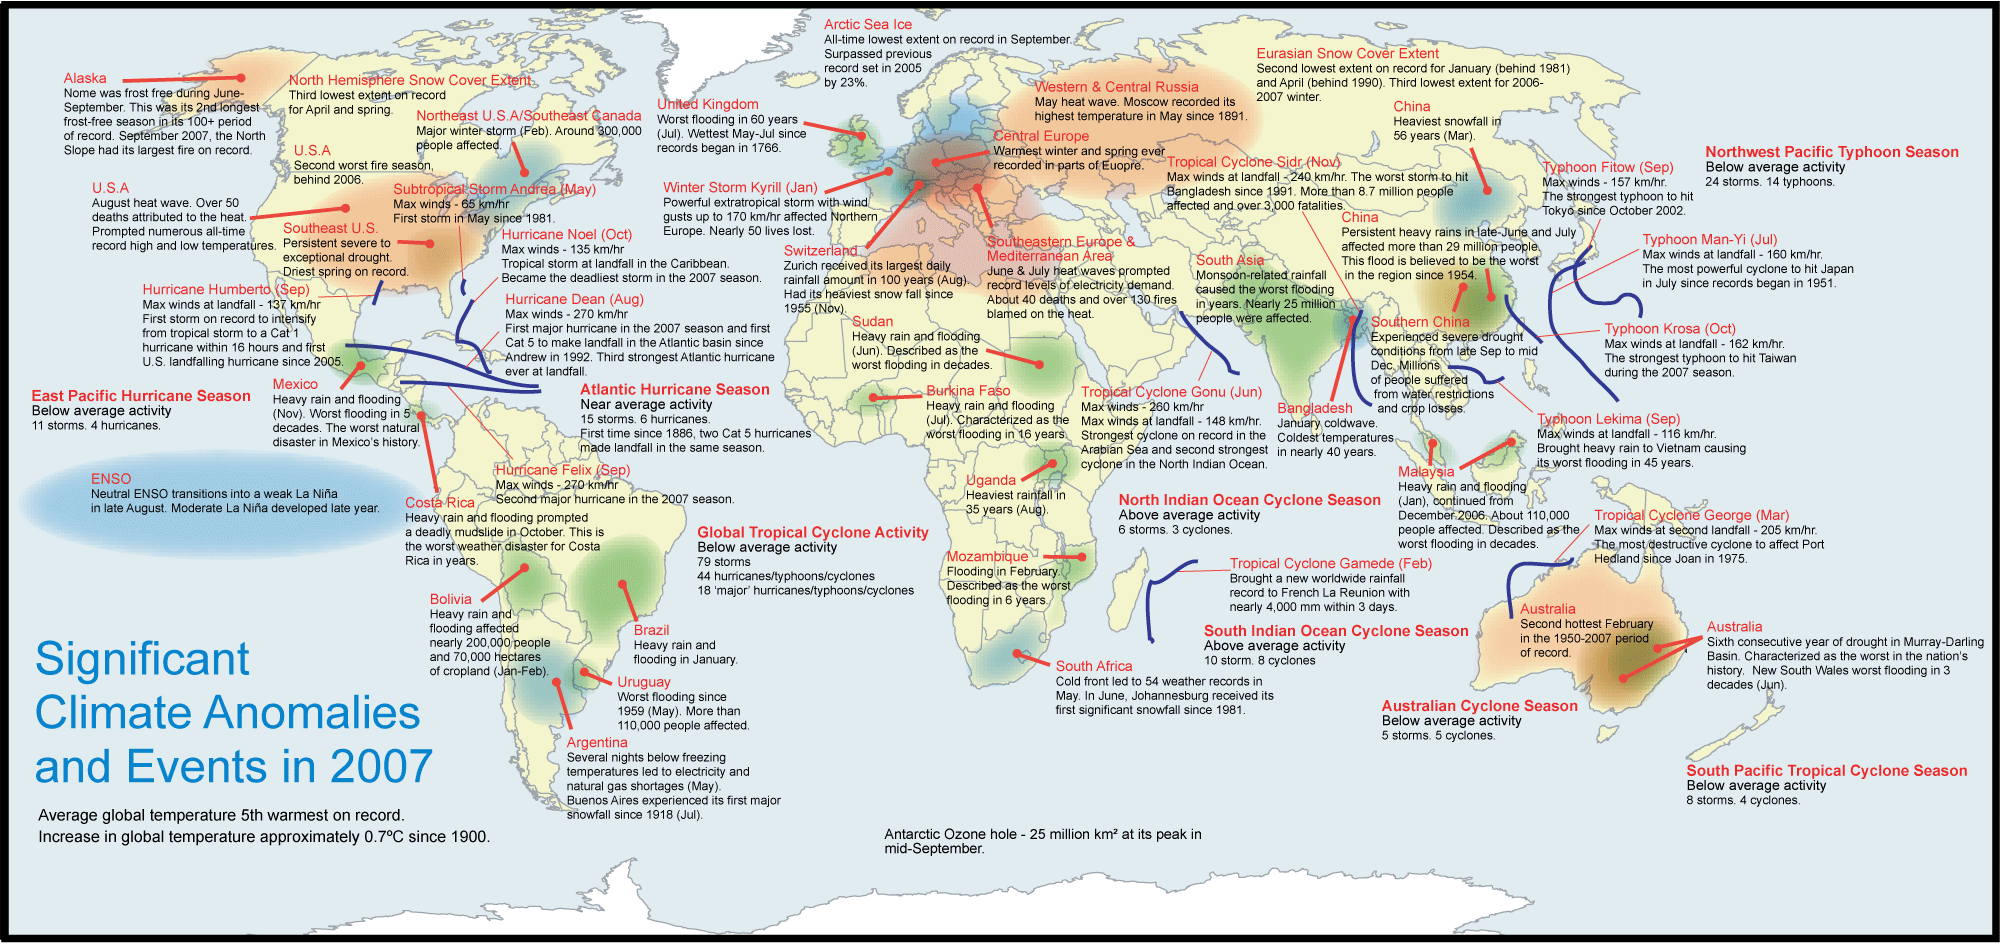 Significant Climate Anomalies in 2007